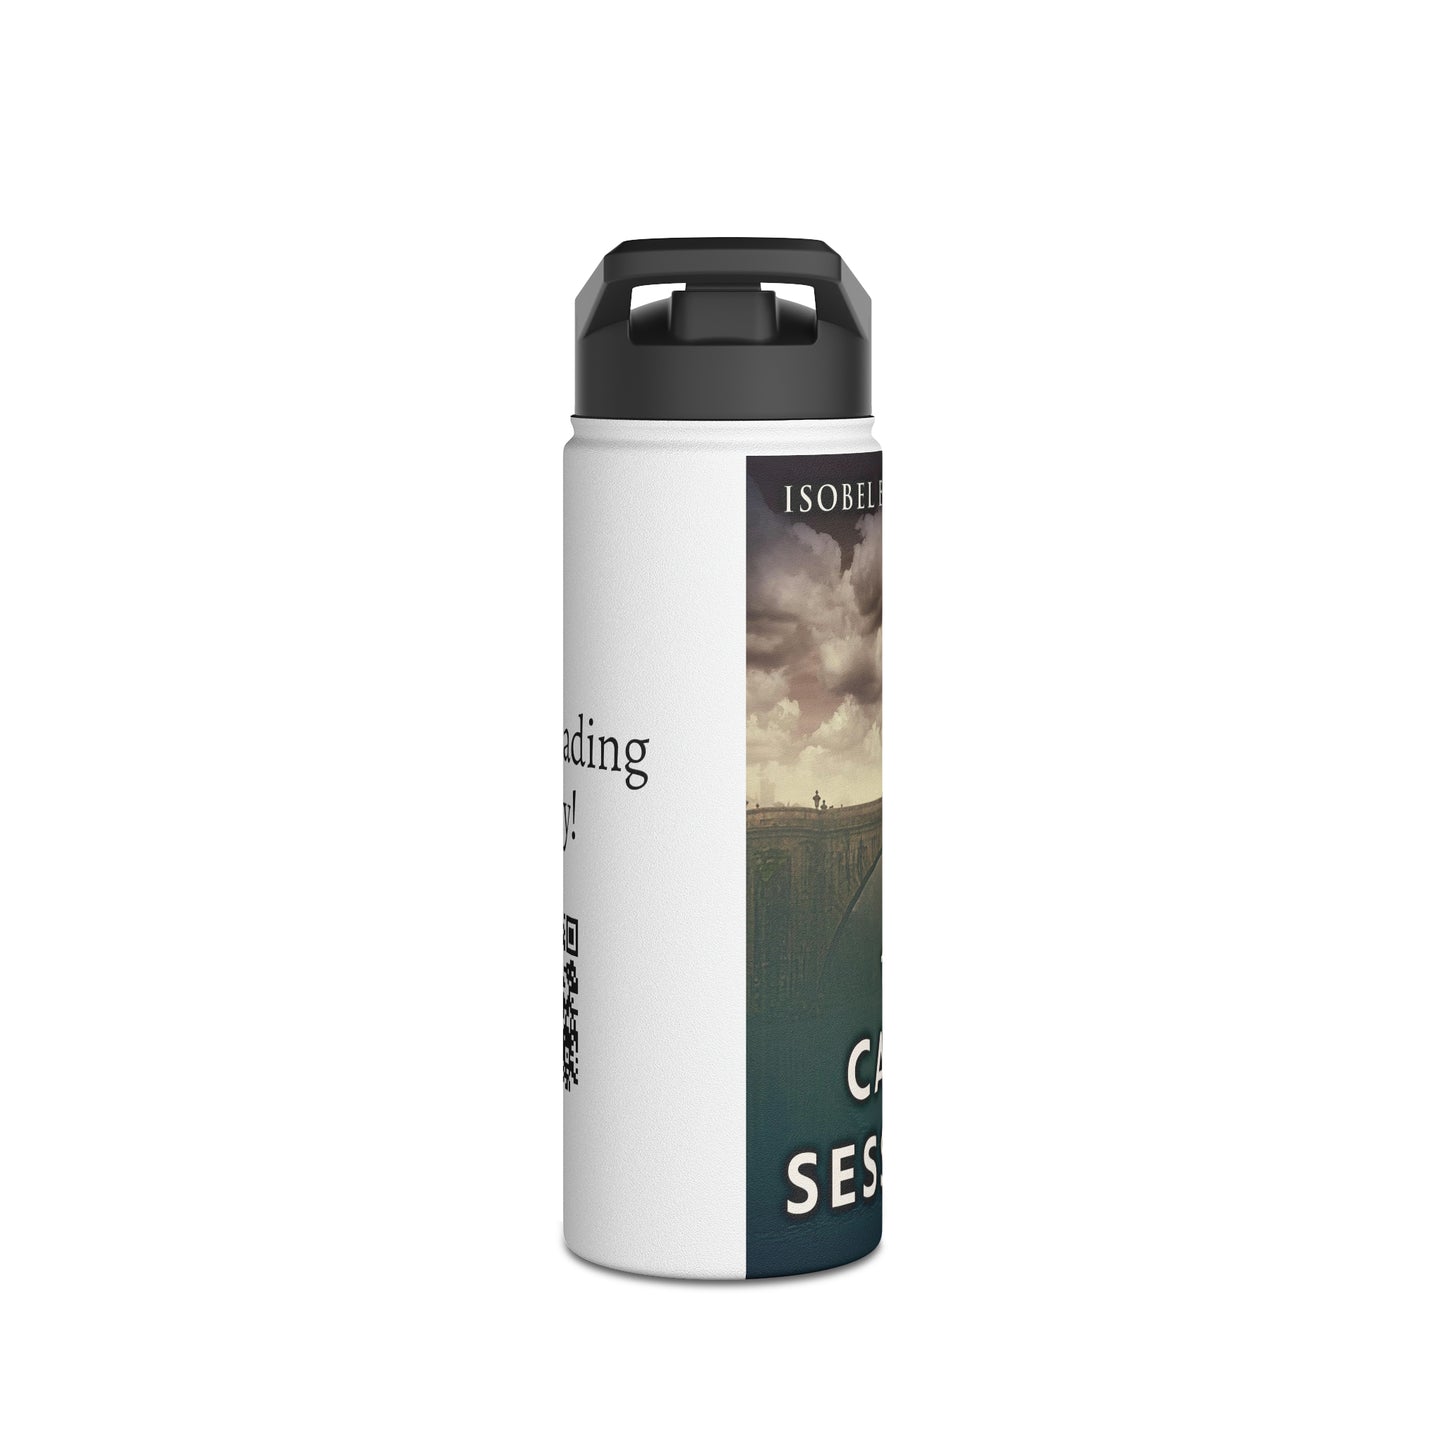 The Cabin Sessions - Stainless Steel Water Bottle